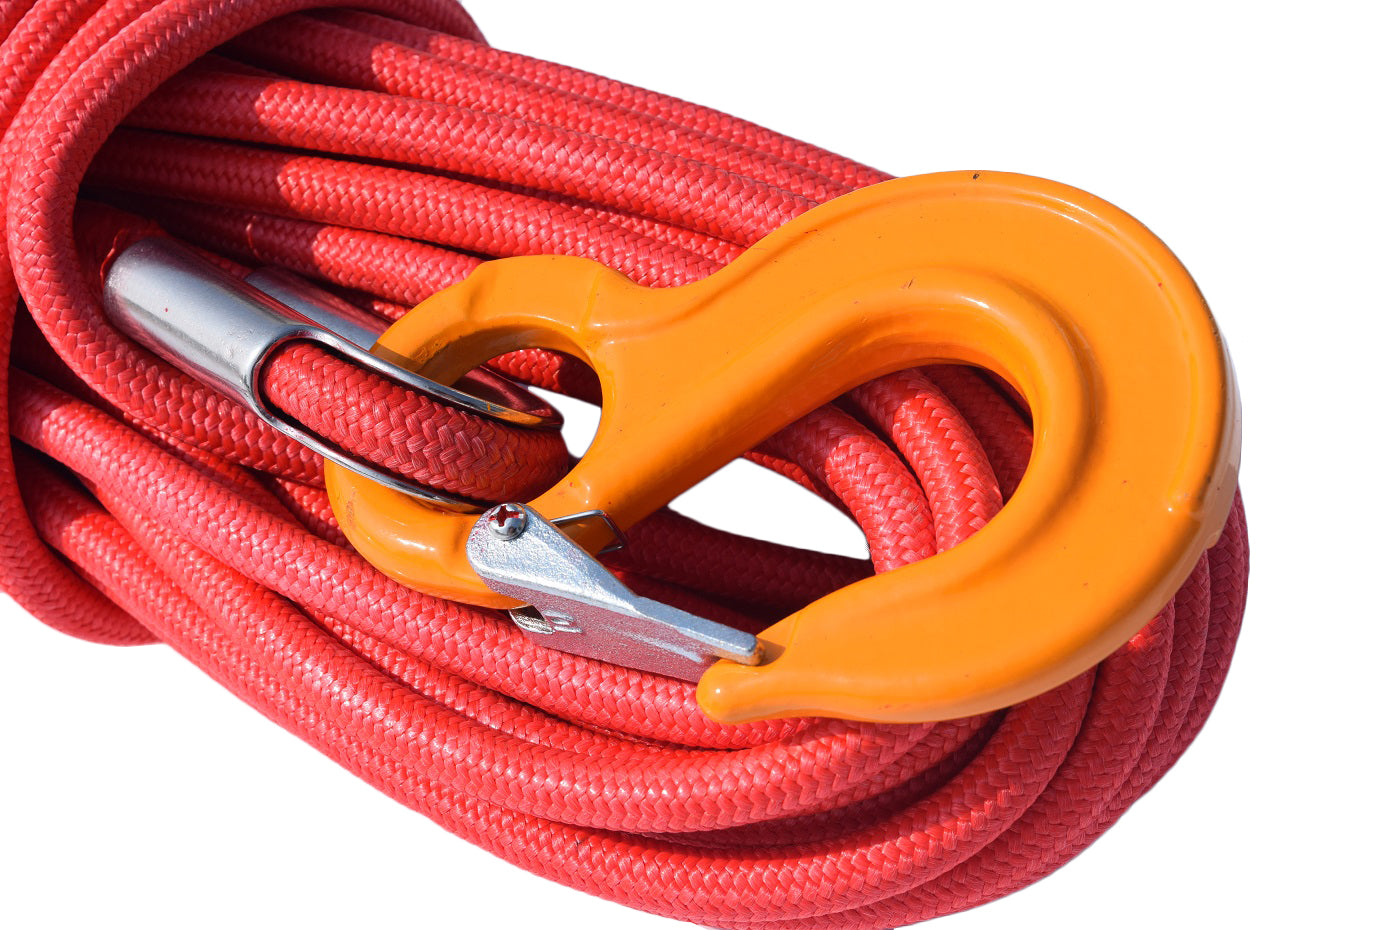 12mm*30m Red UHMWPE core with UHMWPE jacket Synthetic Rope,Winch